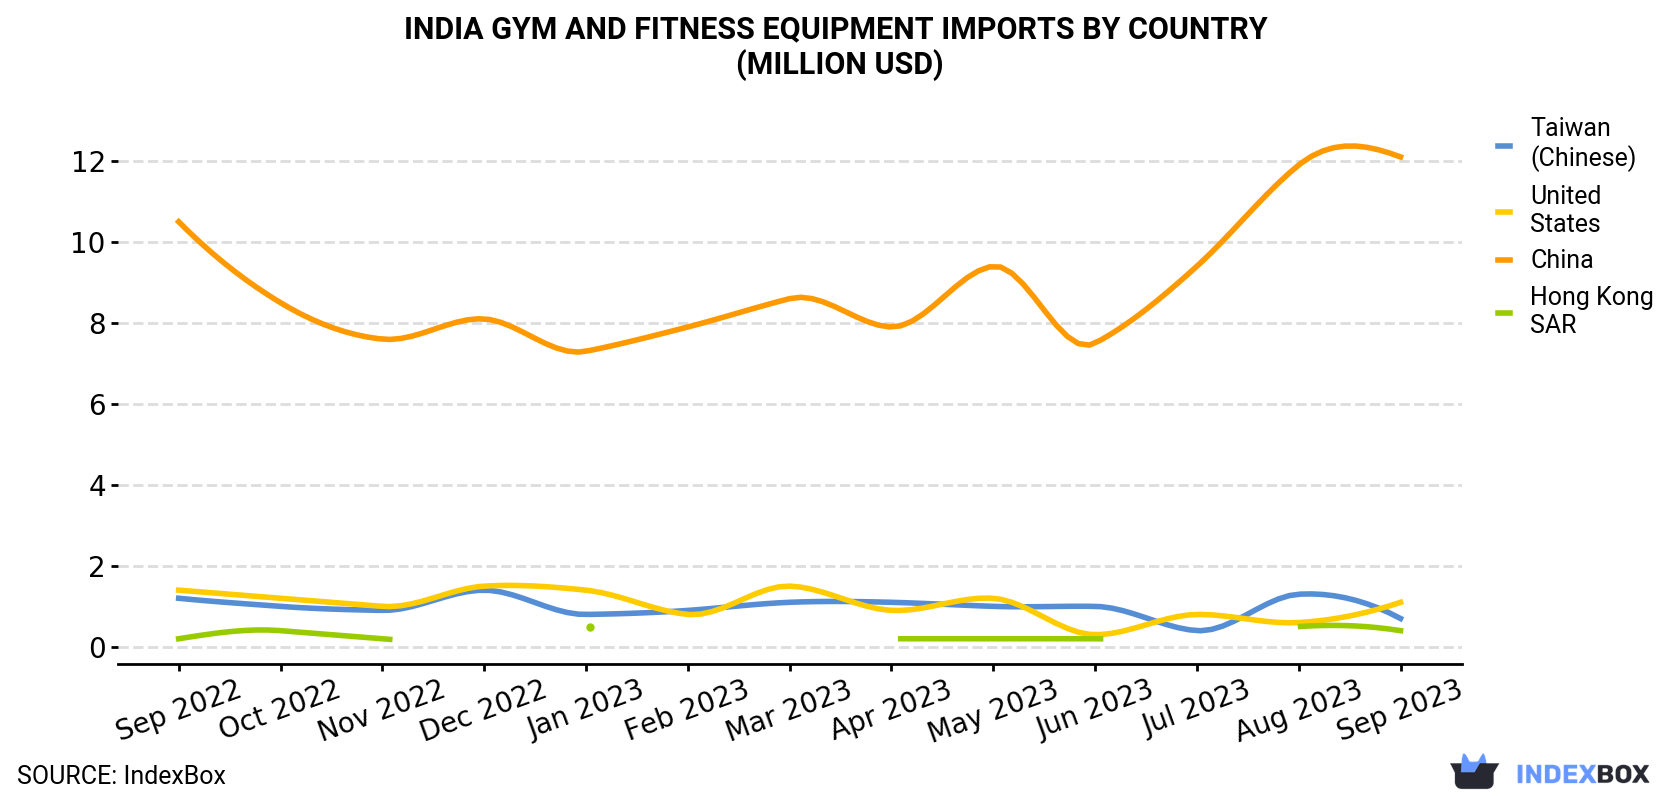 India Gym and Fitness Equipment Imports By Country (Million USD)